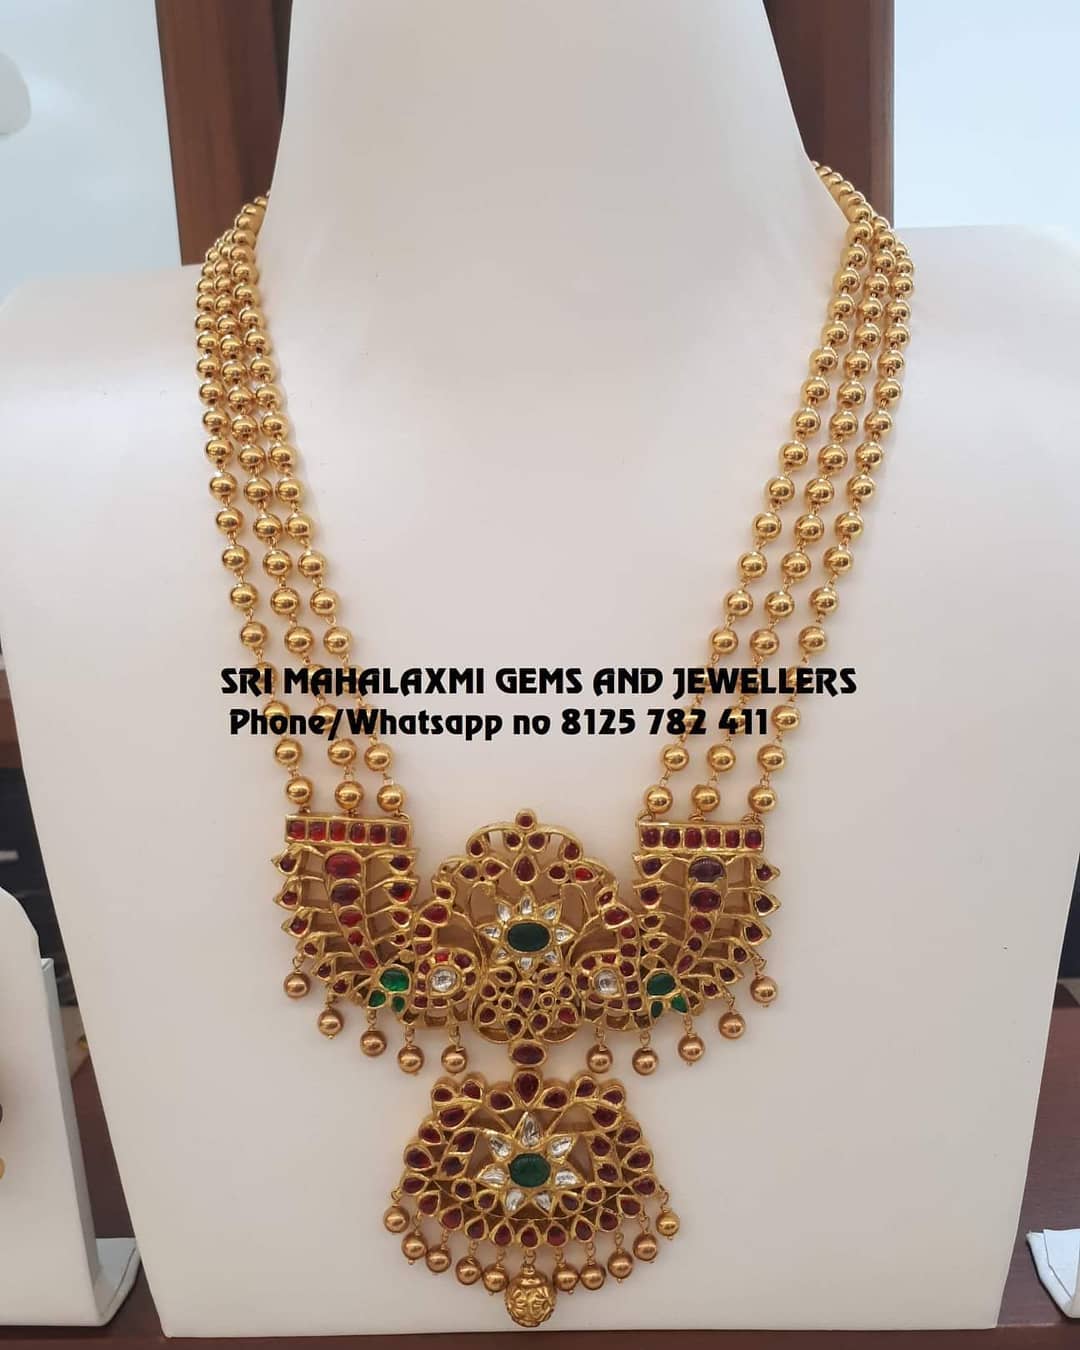 Attractive Layered Necklace From Sri Mahalakshmi Gems And Jewellers ...